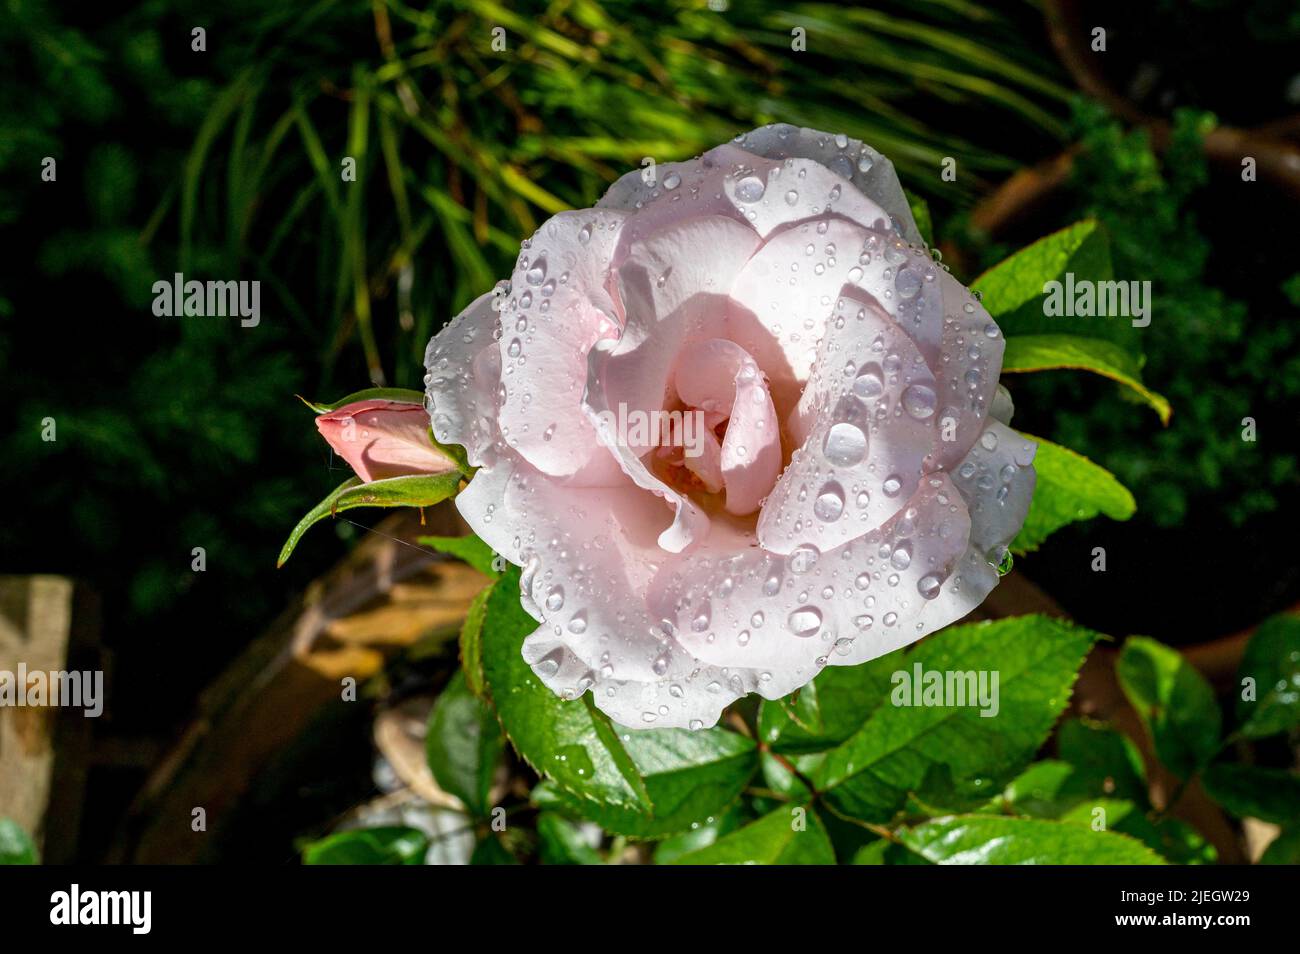 Pale pink rose with summer dew on the petals in garden Stock Photo